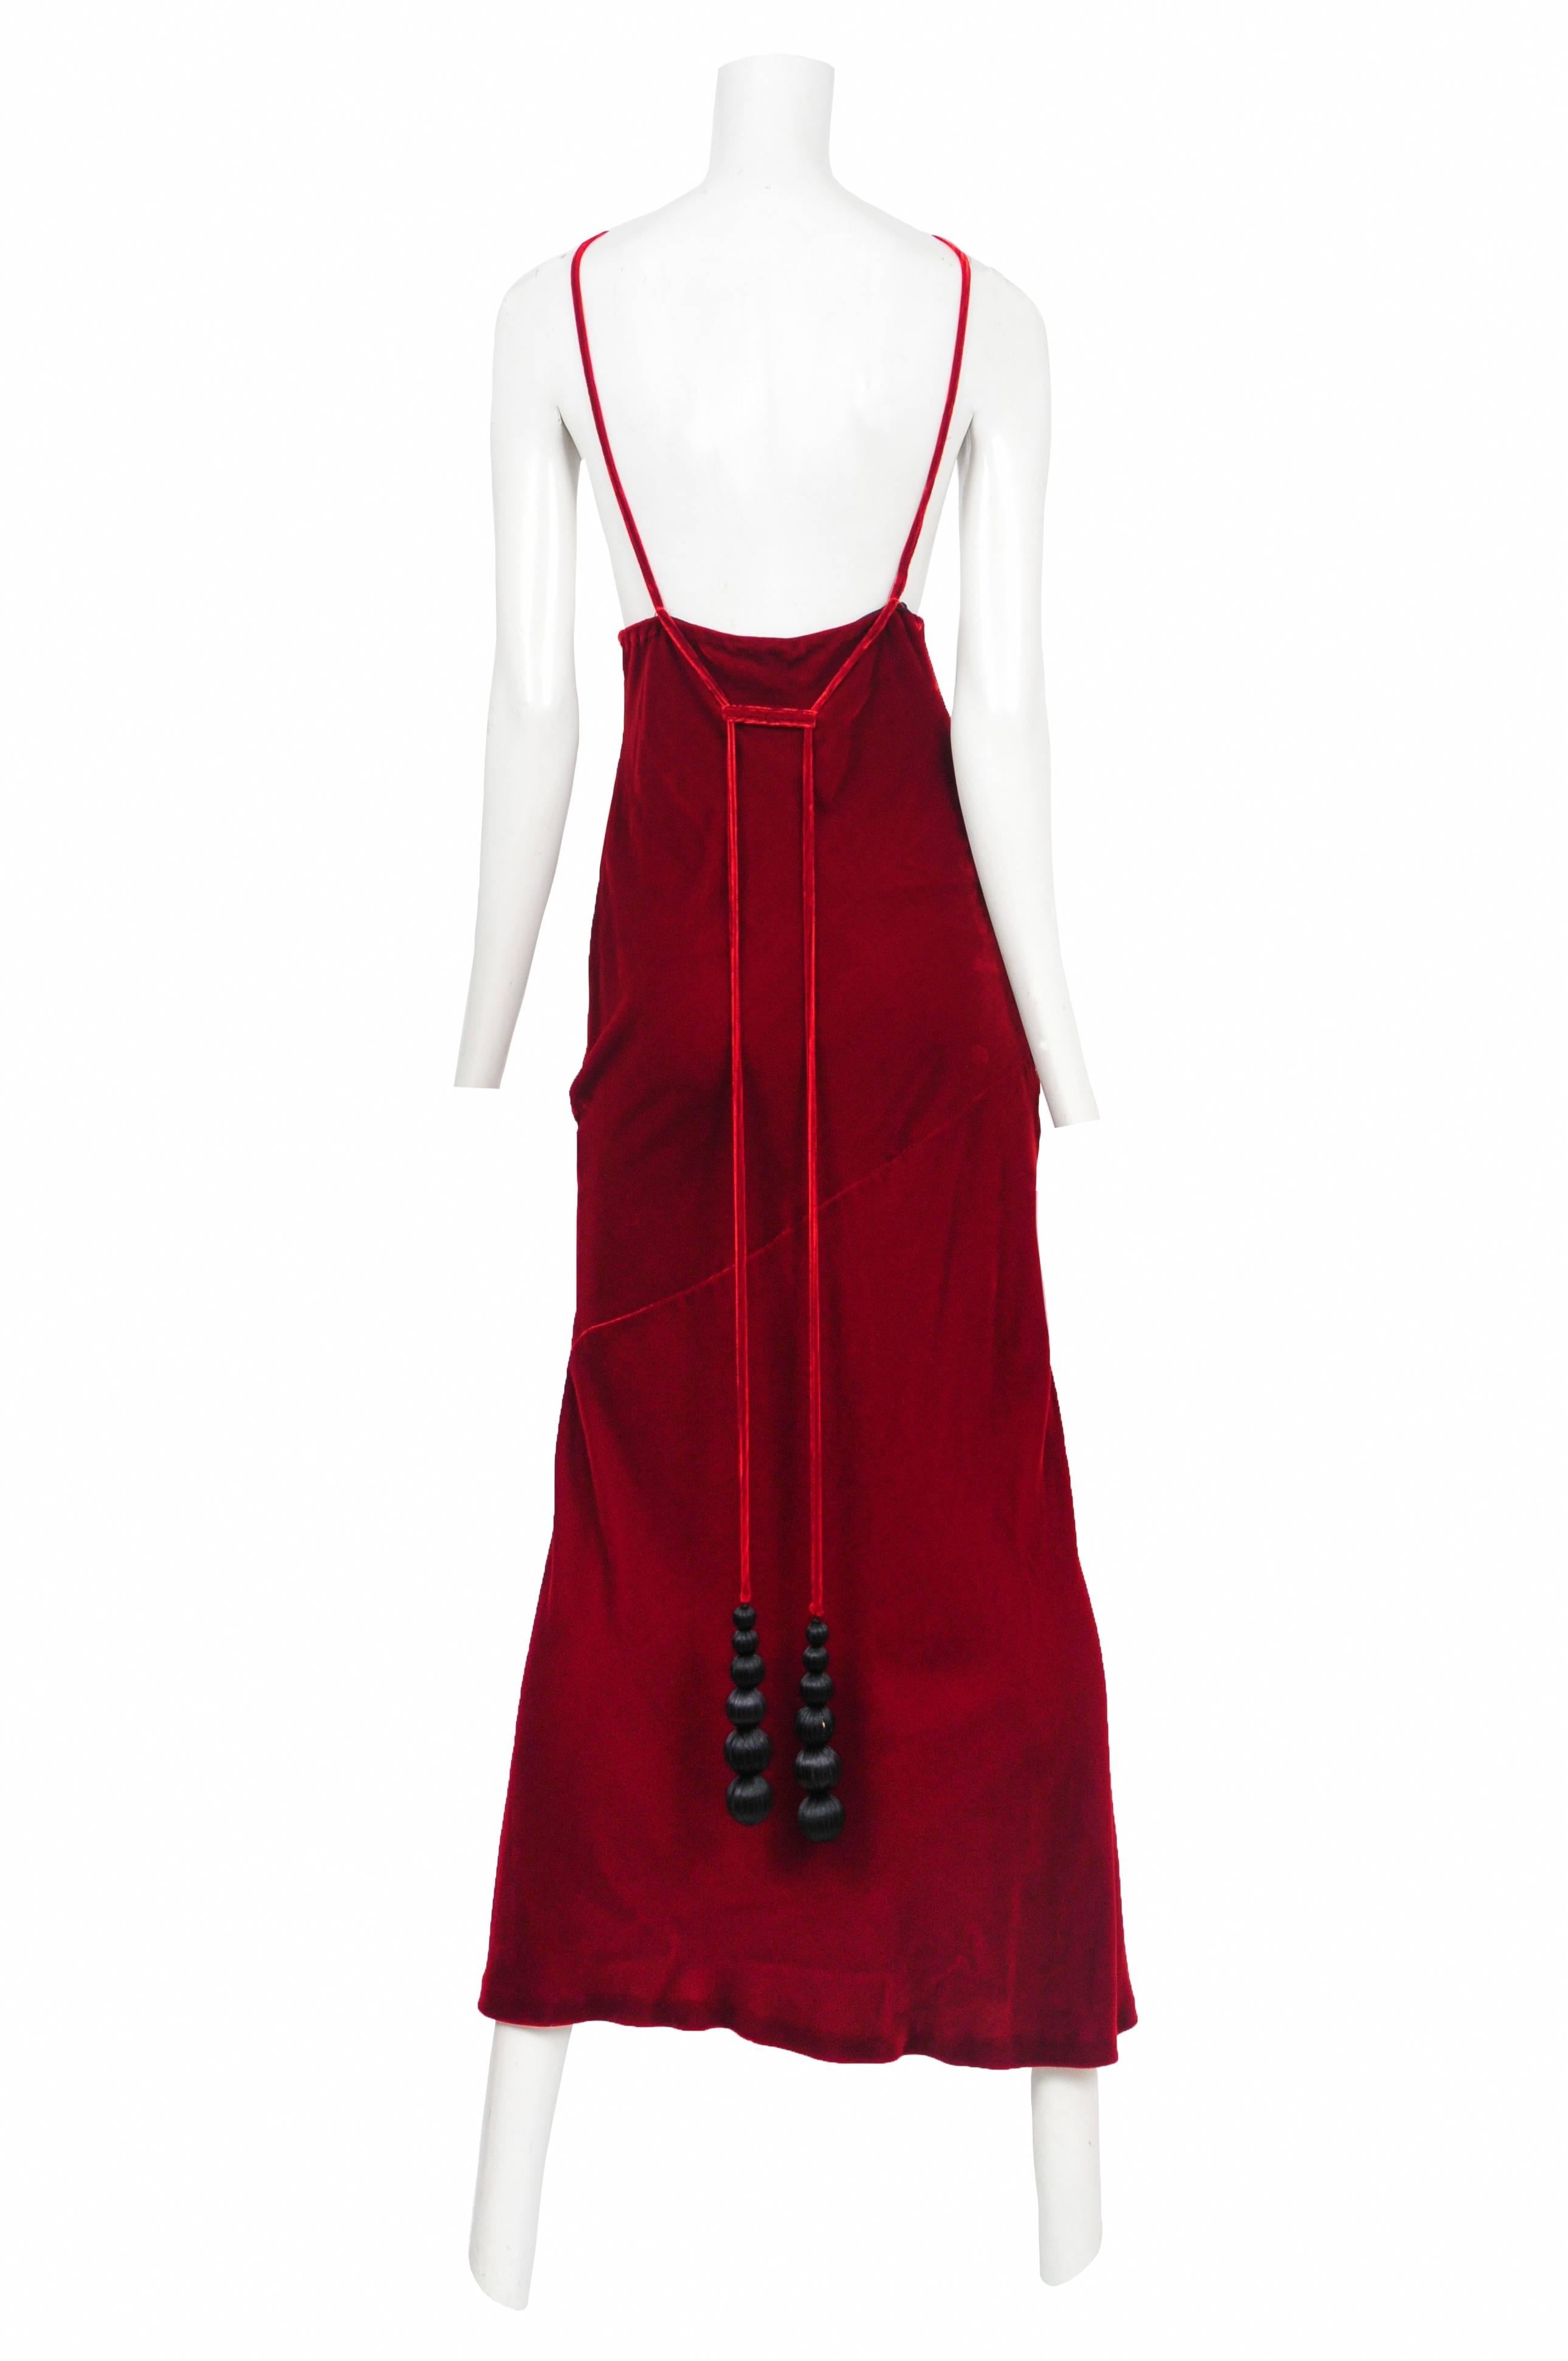 Vintage Jean Paul Gaultier red velvet bias slip dress featuring a deep v-neckline, spaghetti straps and black ribbon covered tassel balls that hang from the back.